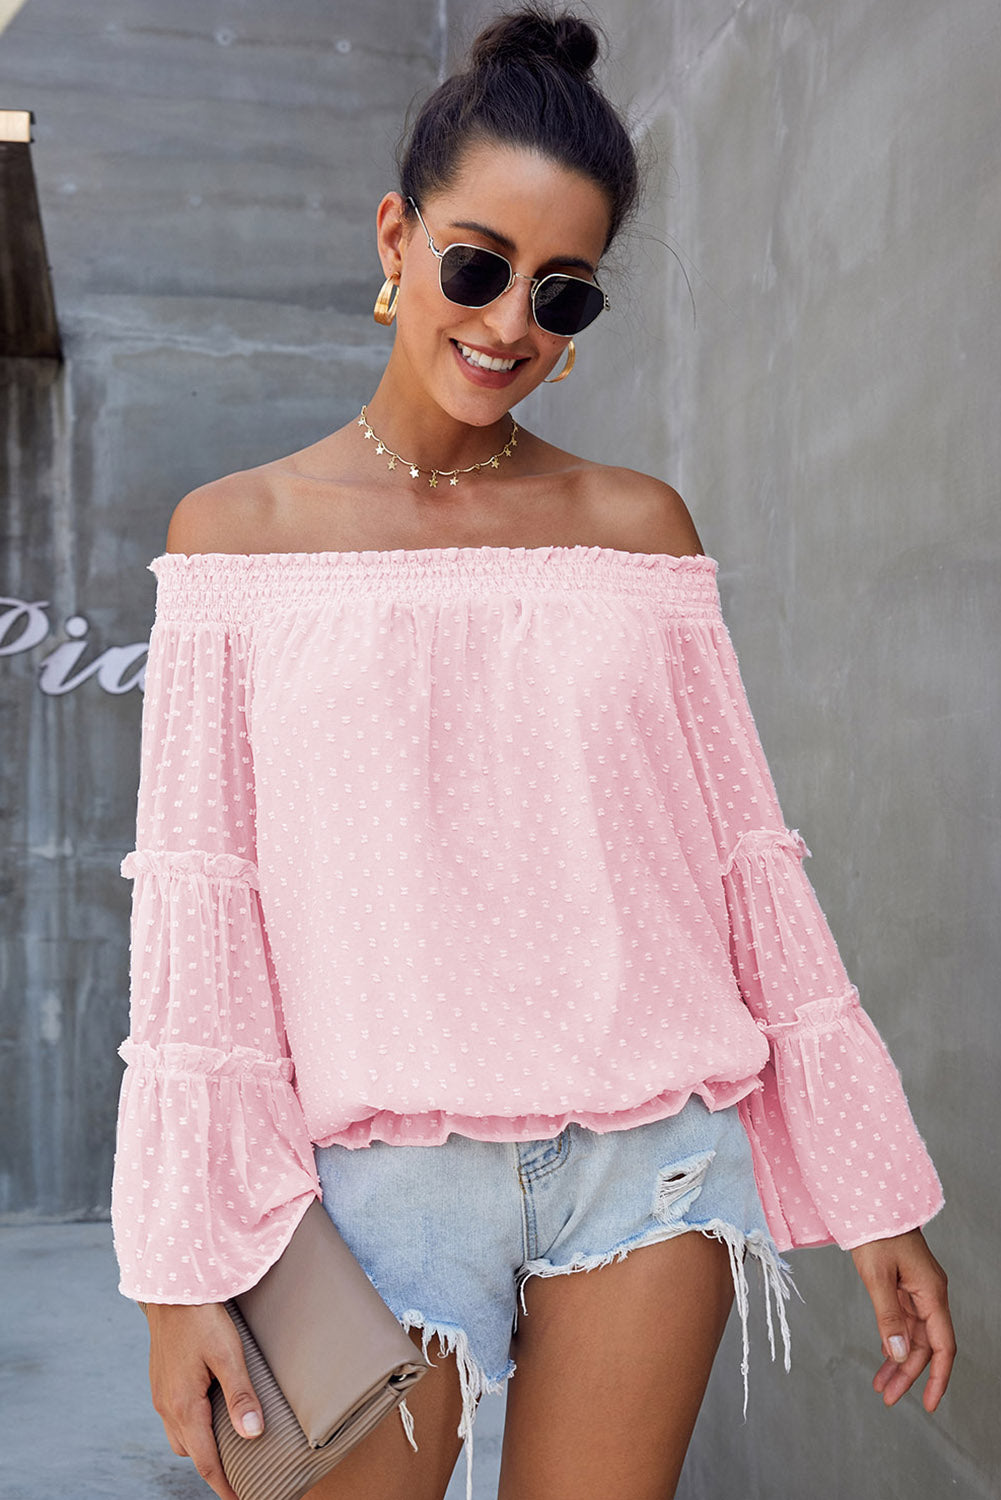 Blouse Chic a Pois Suisse Rose Manches Flare Epaule Denudee